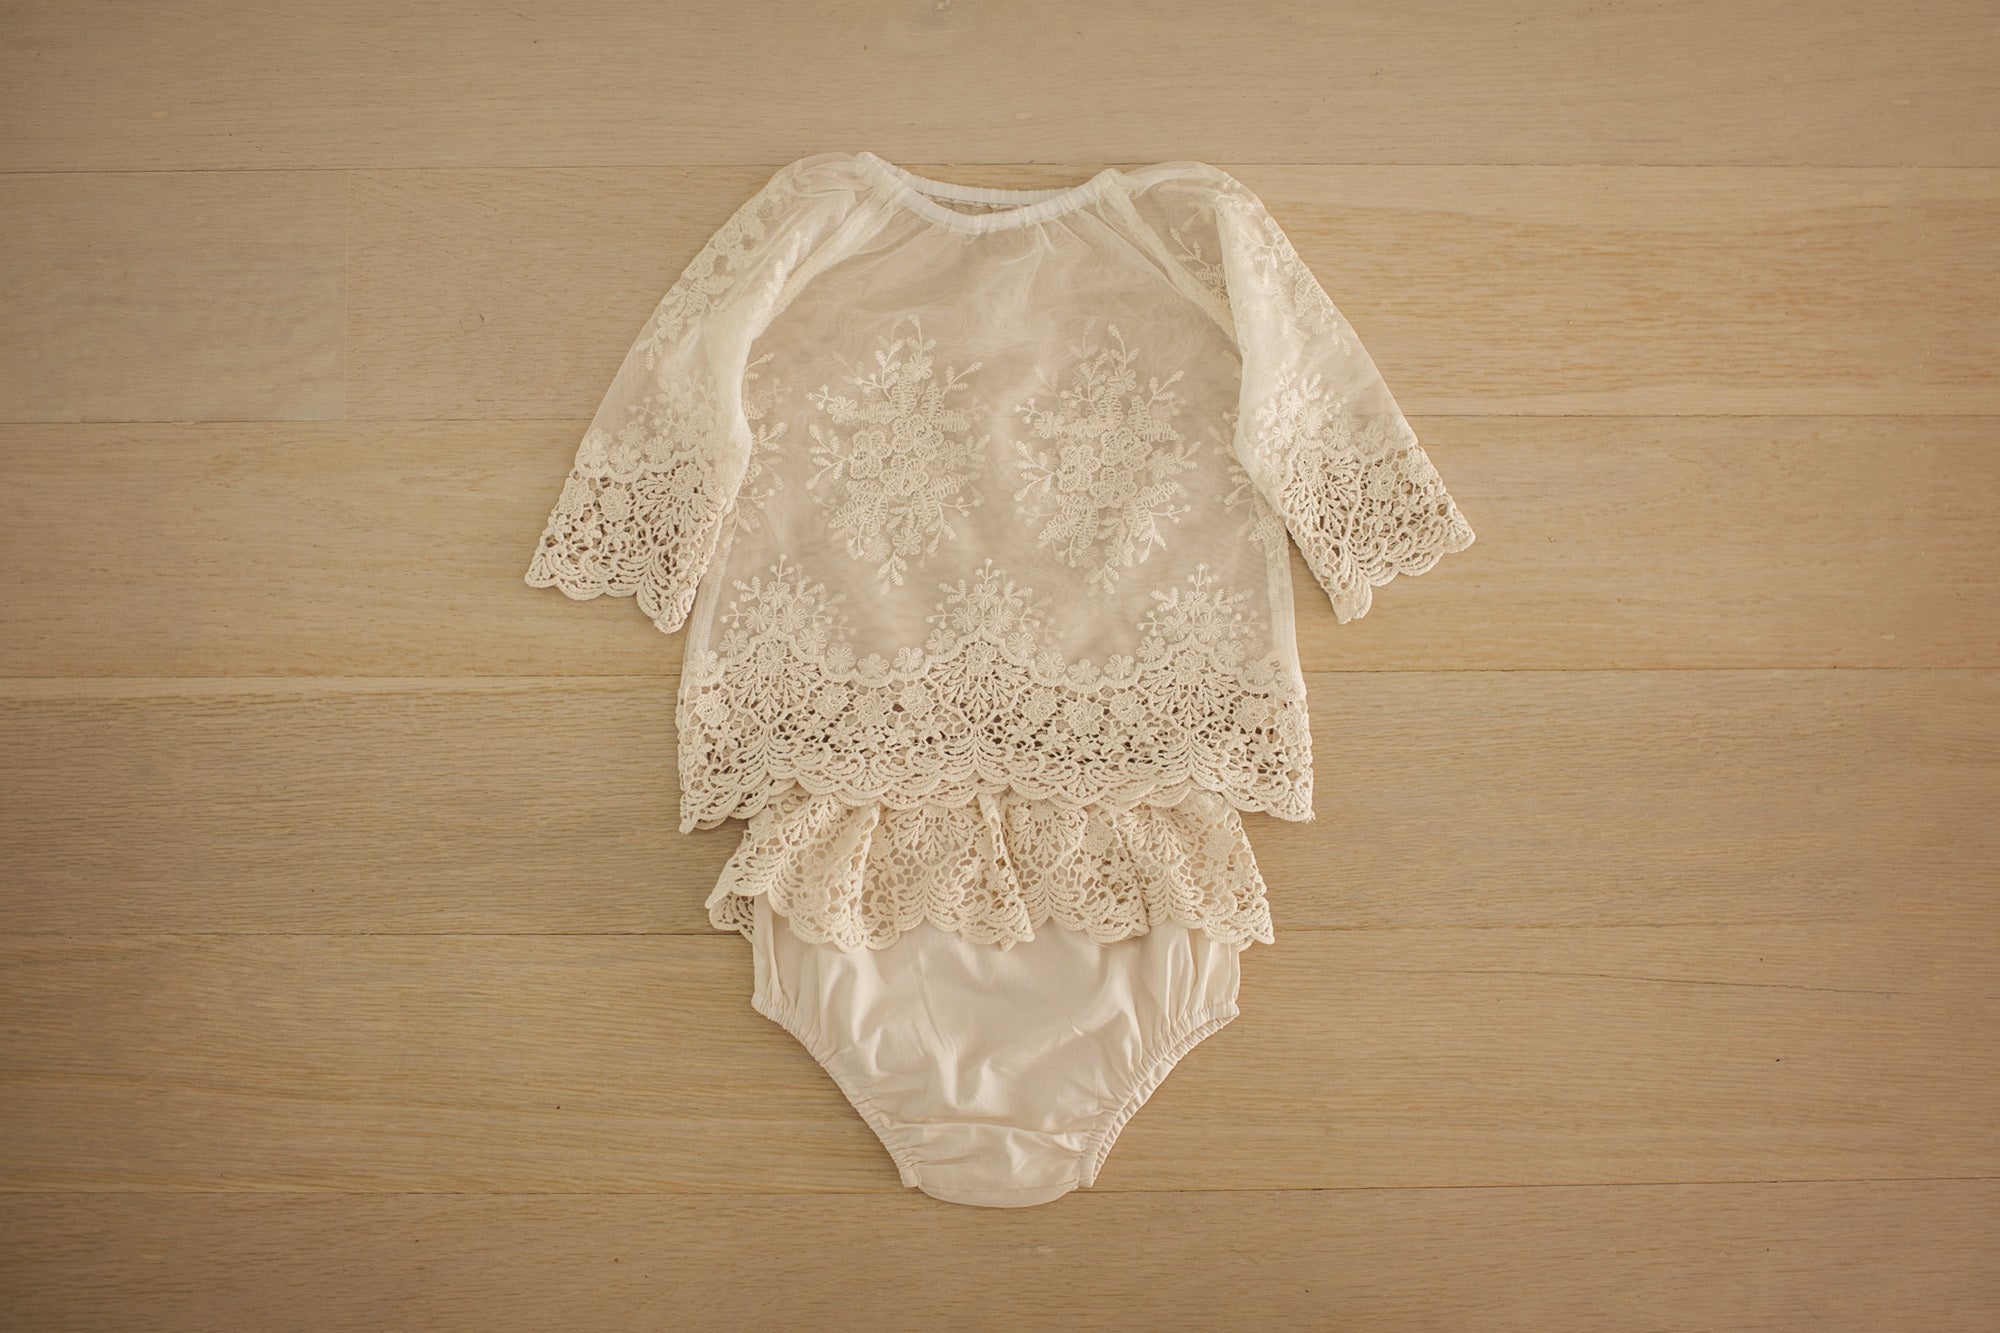 Amelie Lace Top & Bloomers - Newborn Photography Props - Princess & the Pea Props